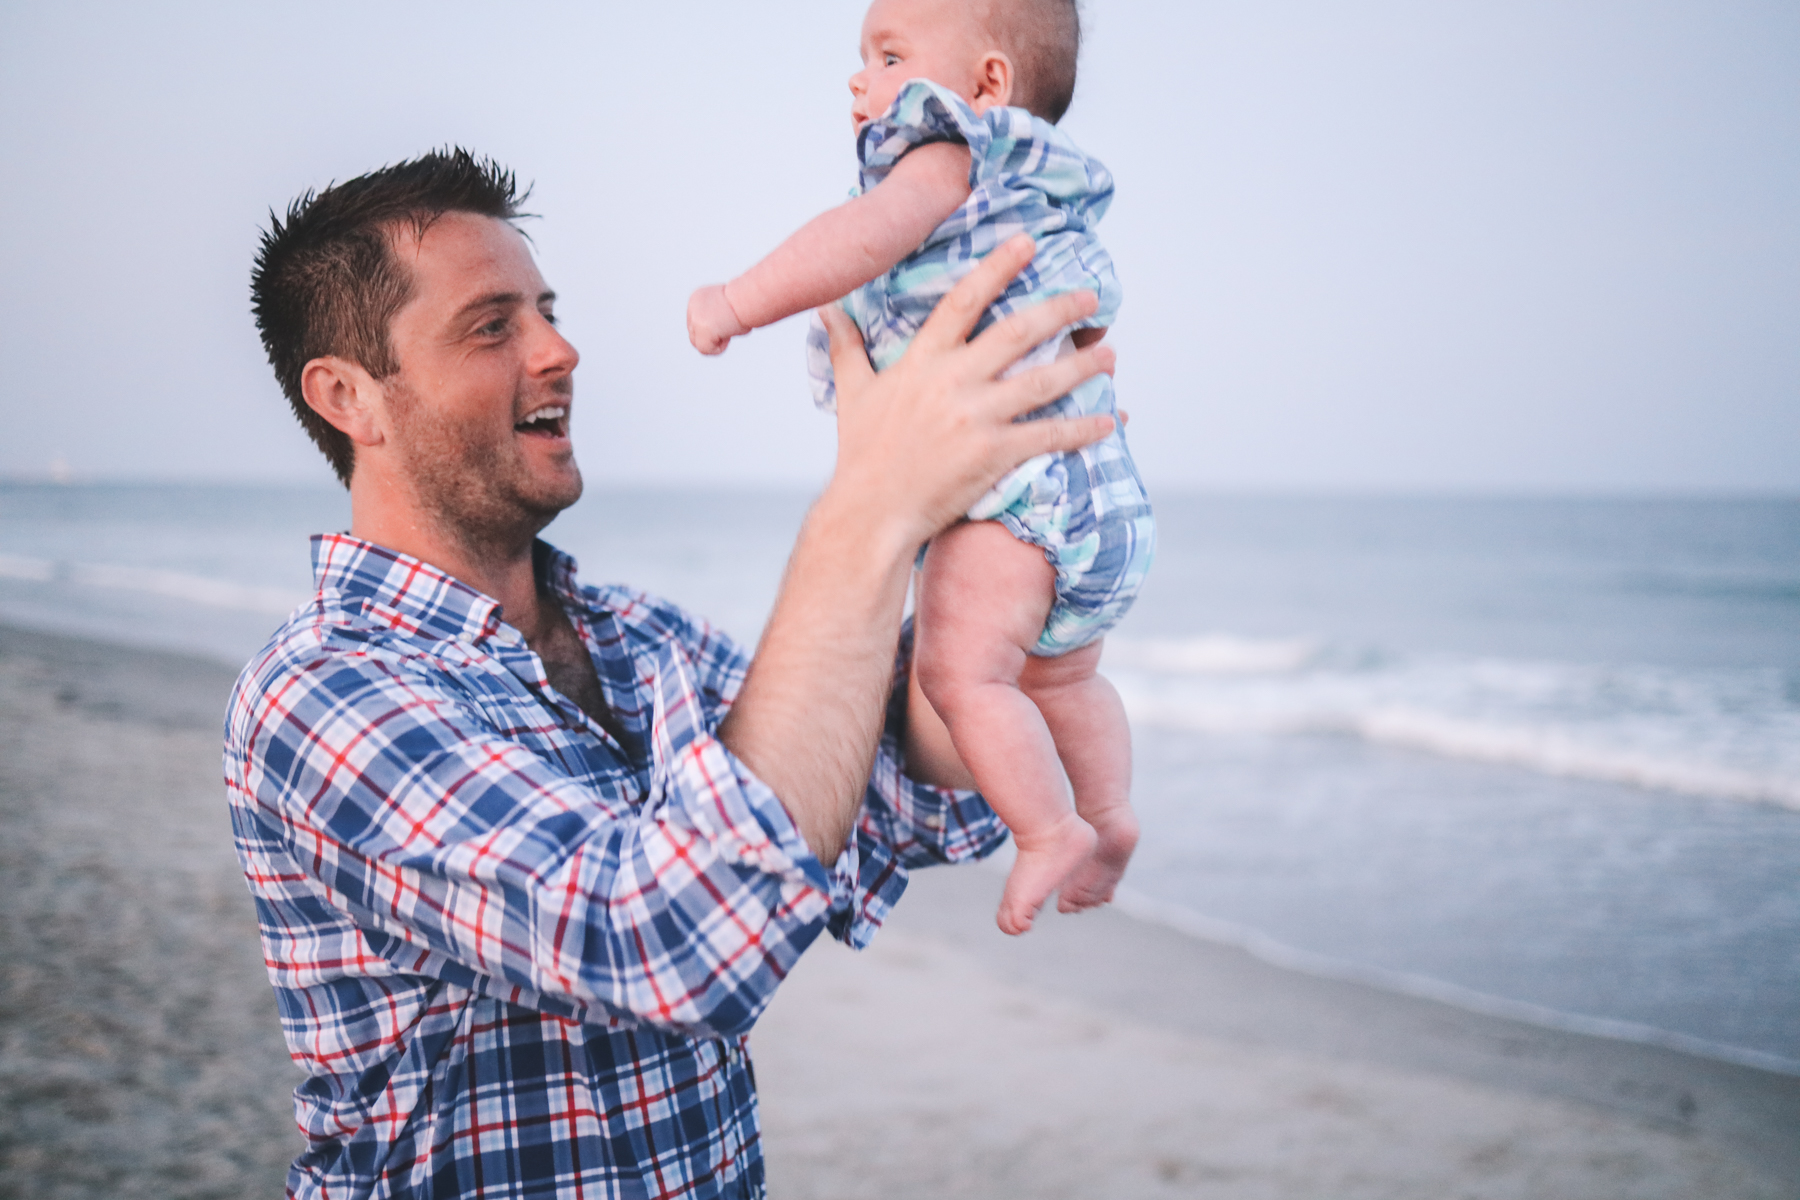 Mitch holds the baby at the beach